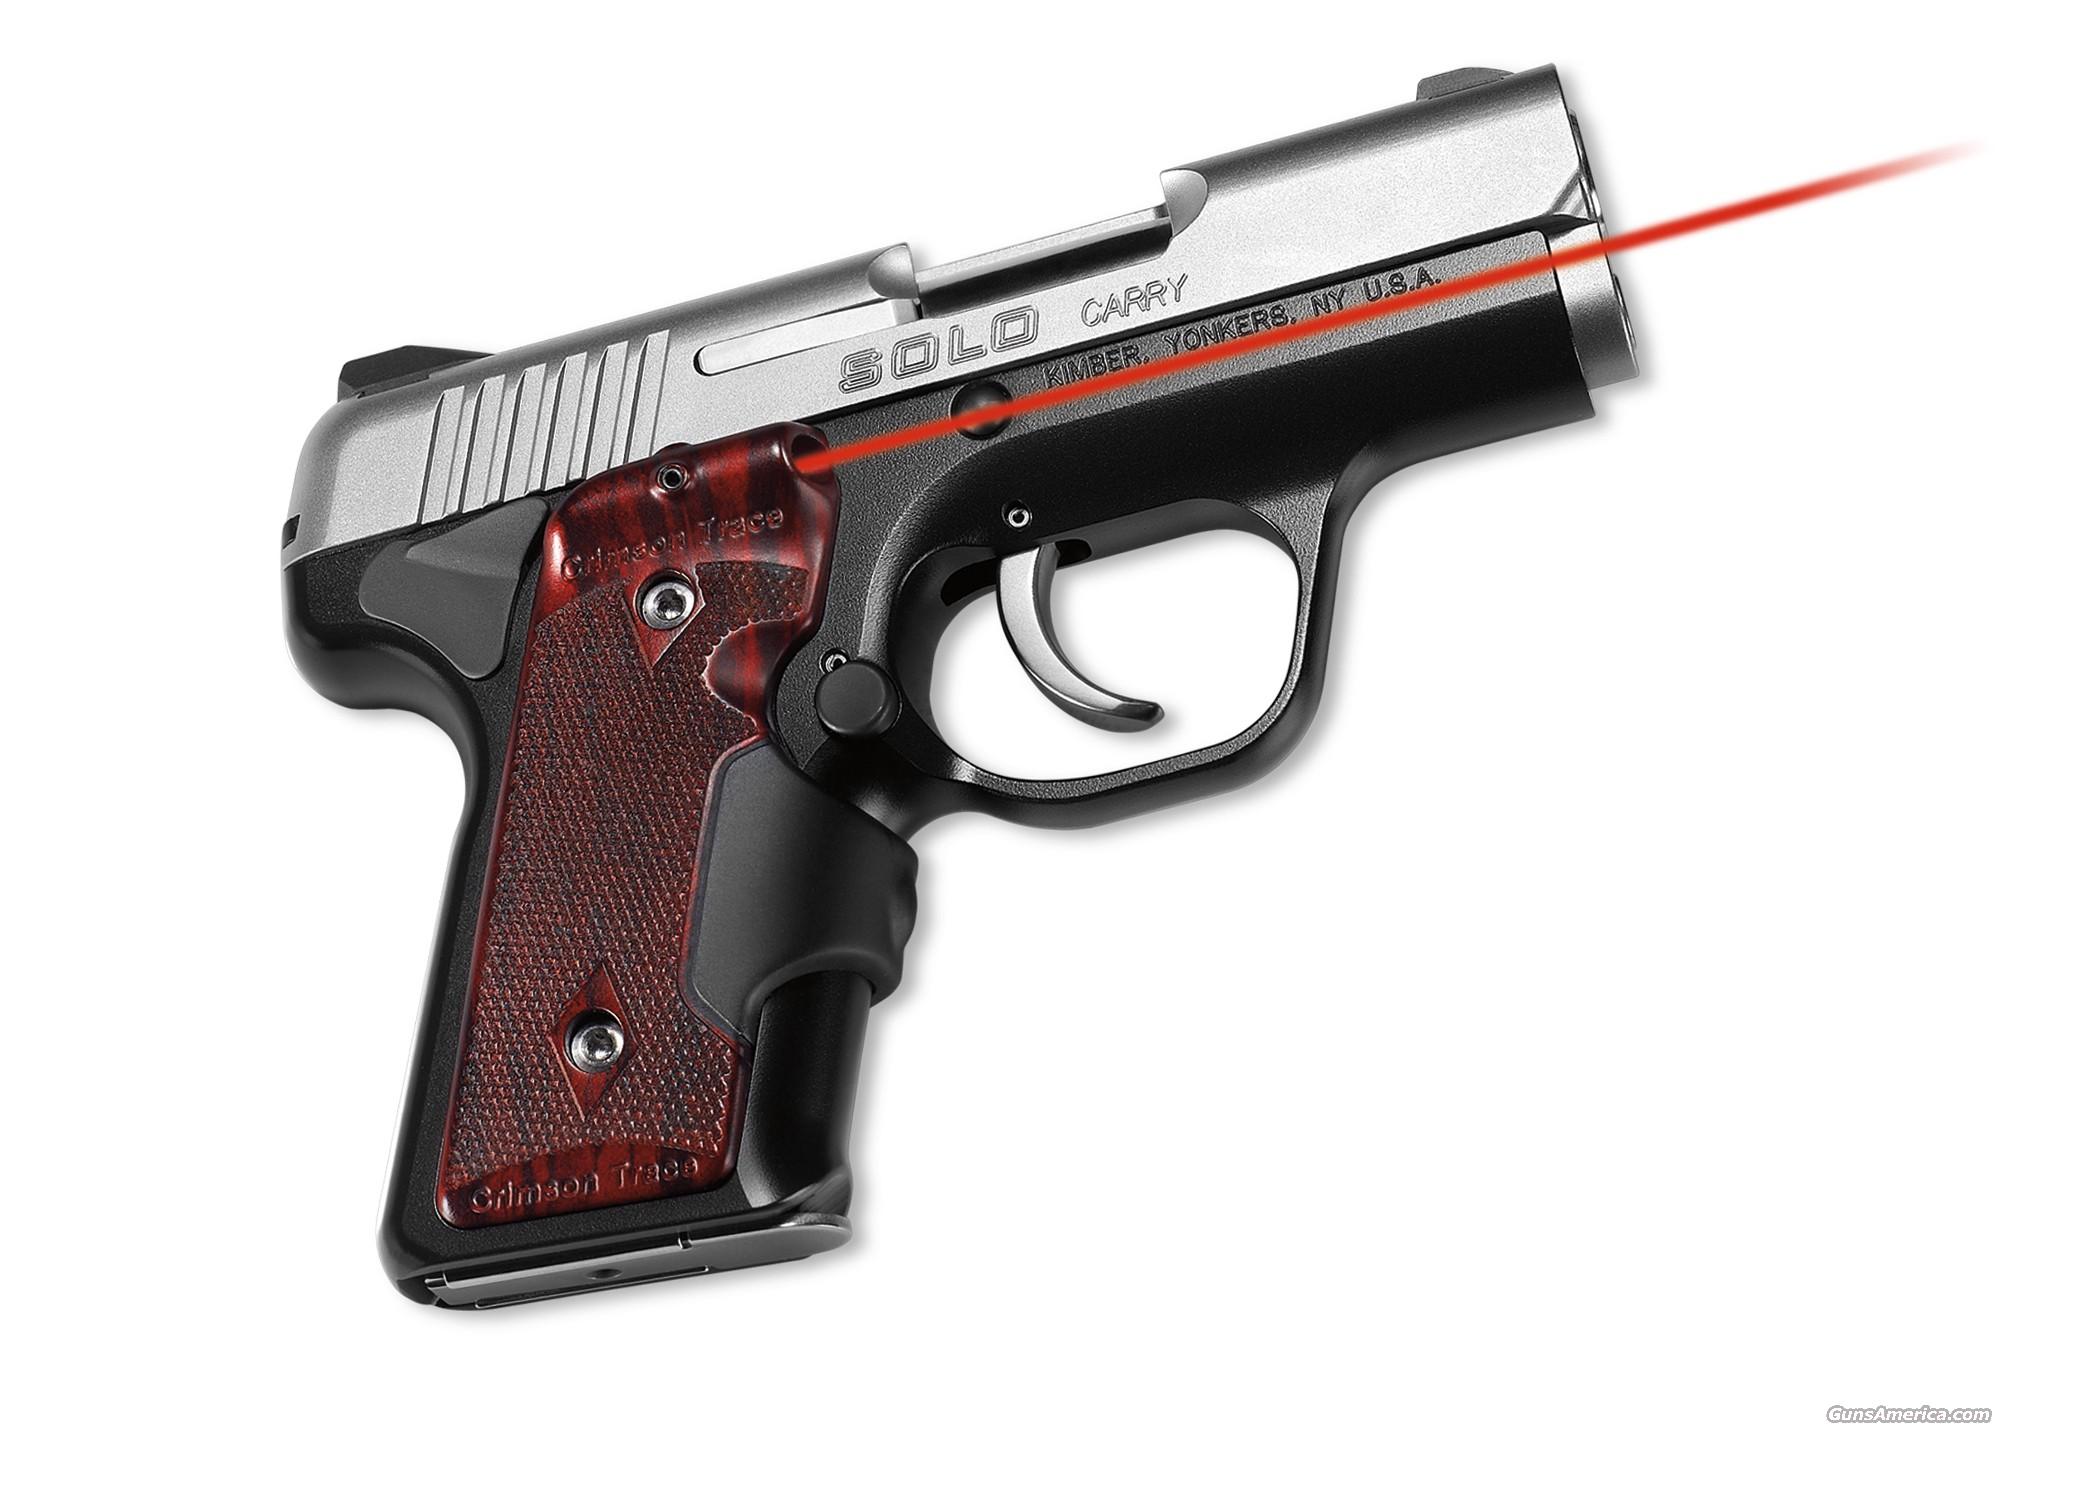 Kimber Solo Cdp 9mm With Crimson Trace Laser Gr For Sale 1054